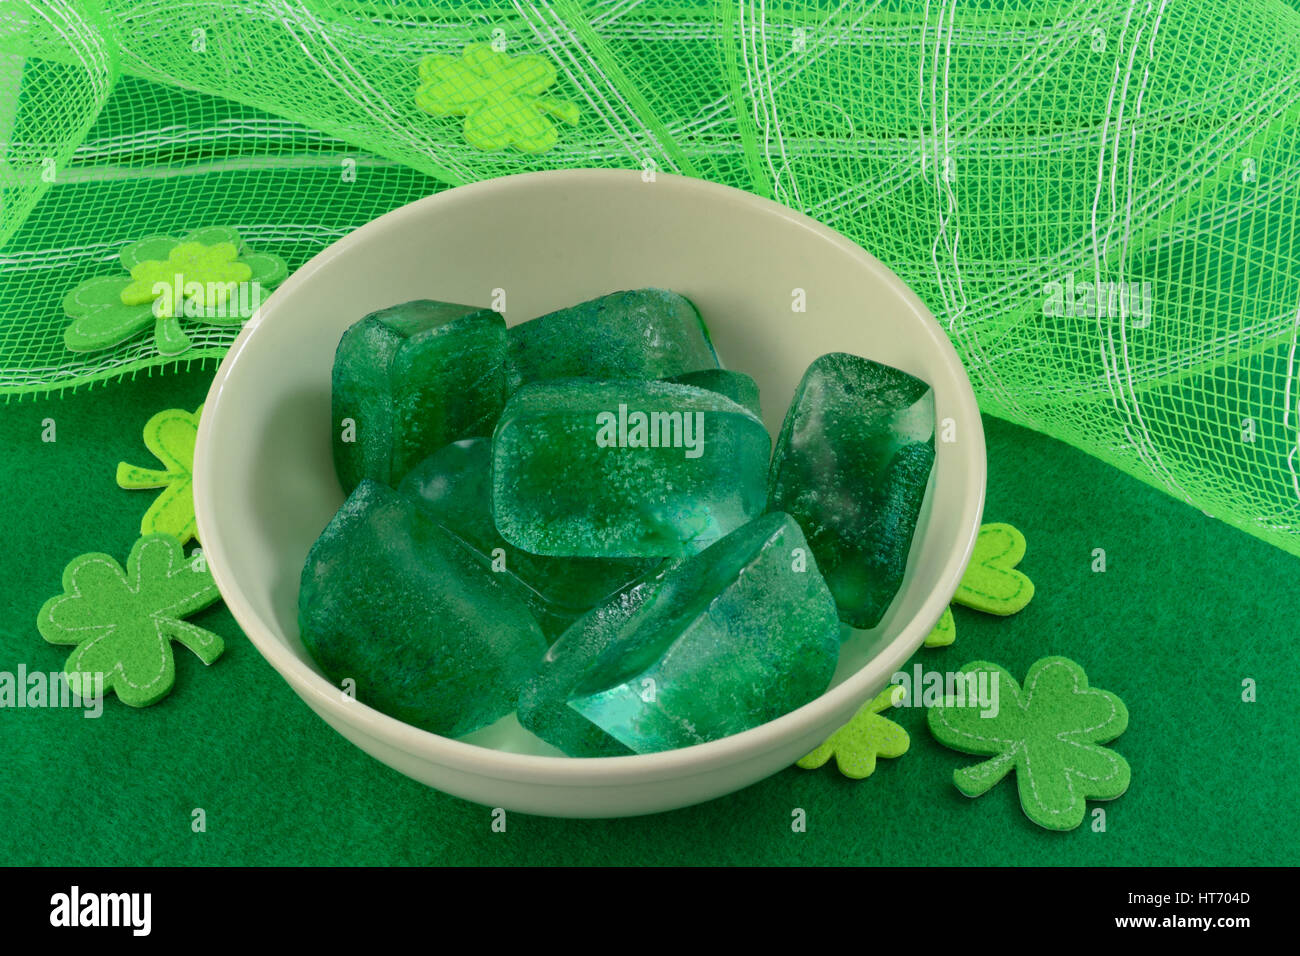 Green ice cubes with green shamrocks for Saint Patrick's Day Stock Photo